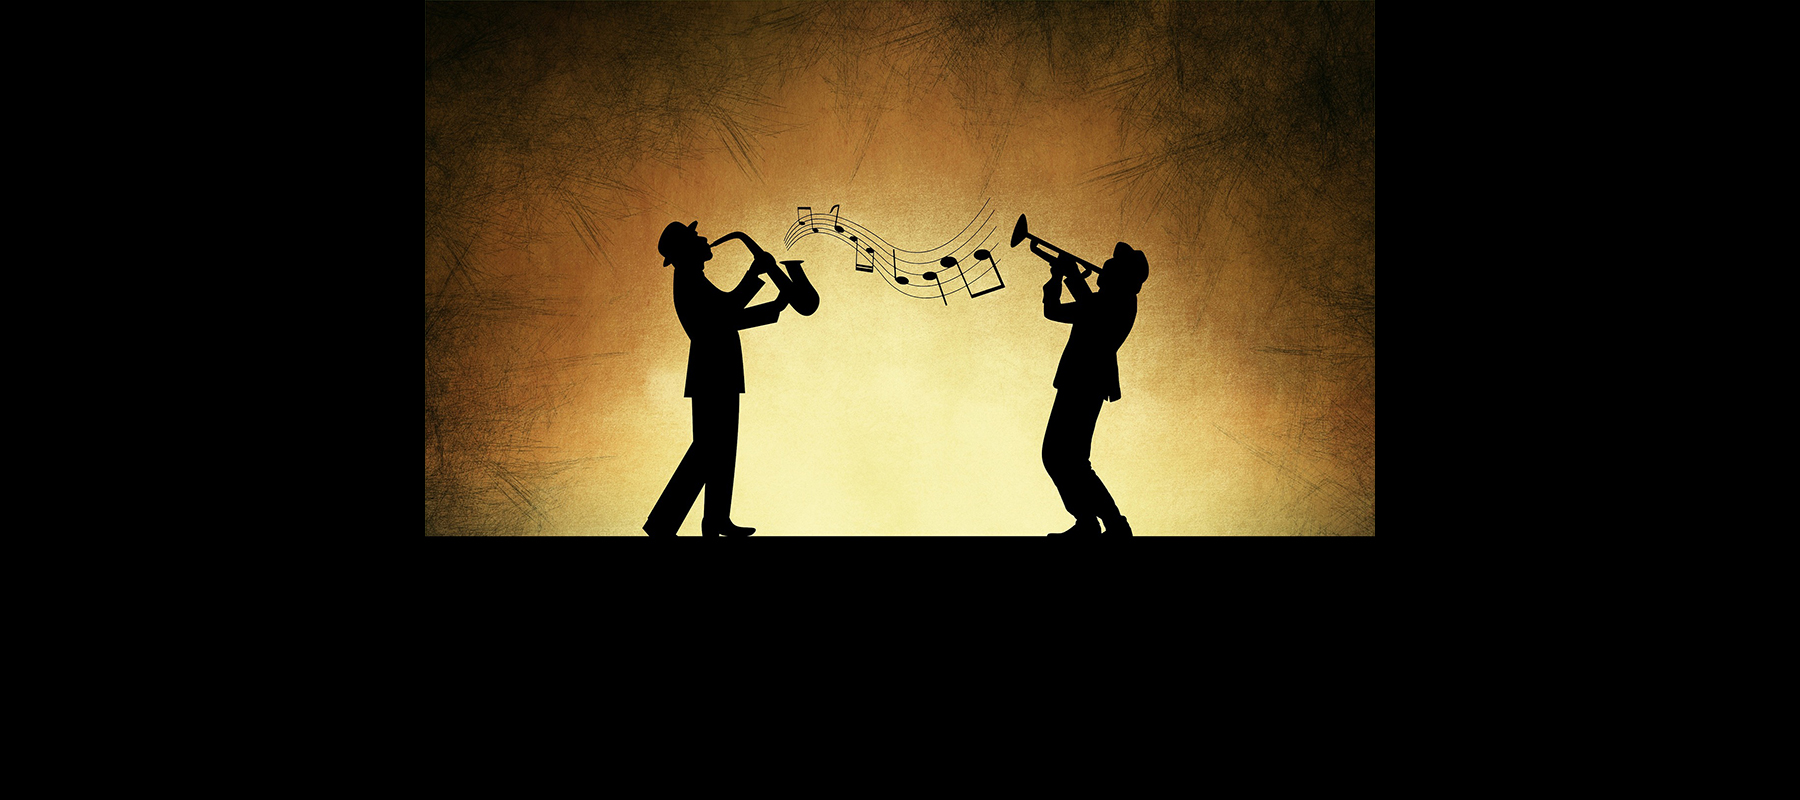 Silhoutes of two people playing musical instruments with a golden background